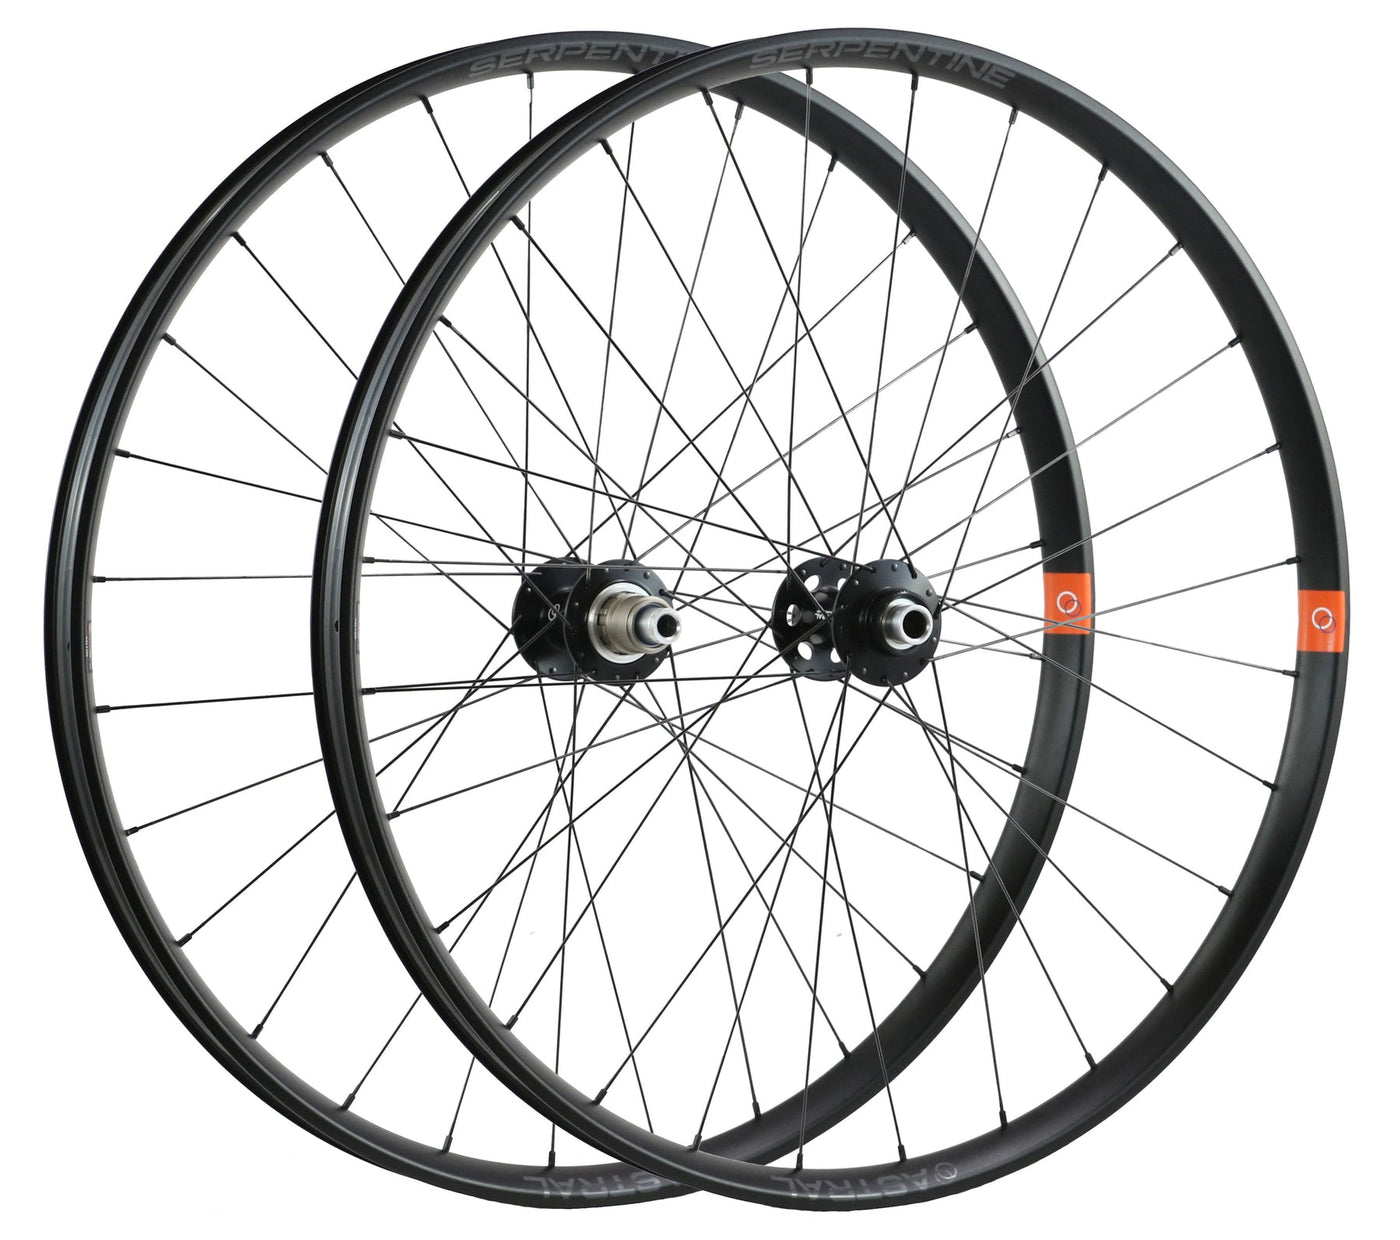 Astral Serpentine Alloy Disc Rims to Astral Approach BOOST CL Hubs